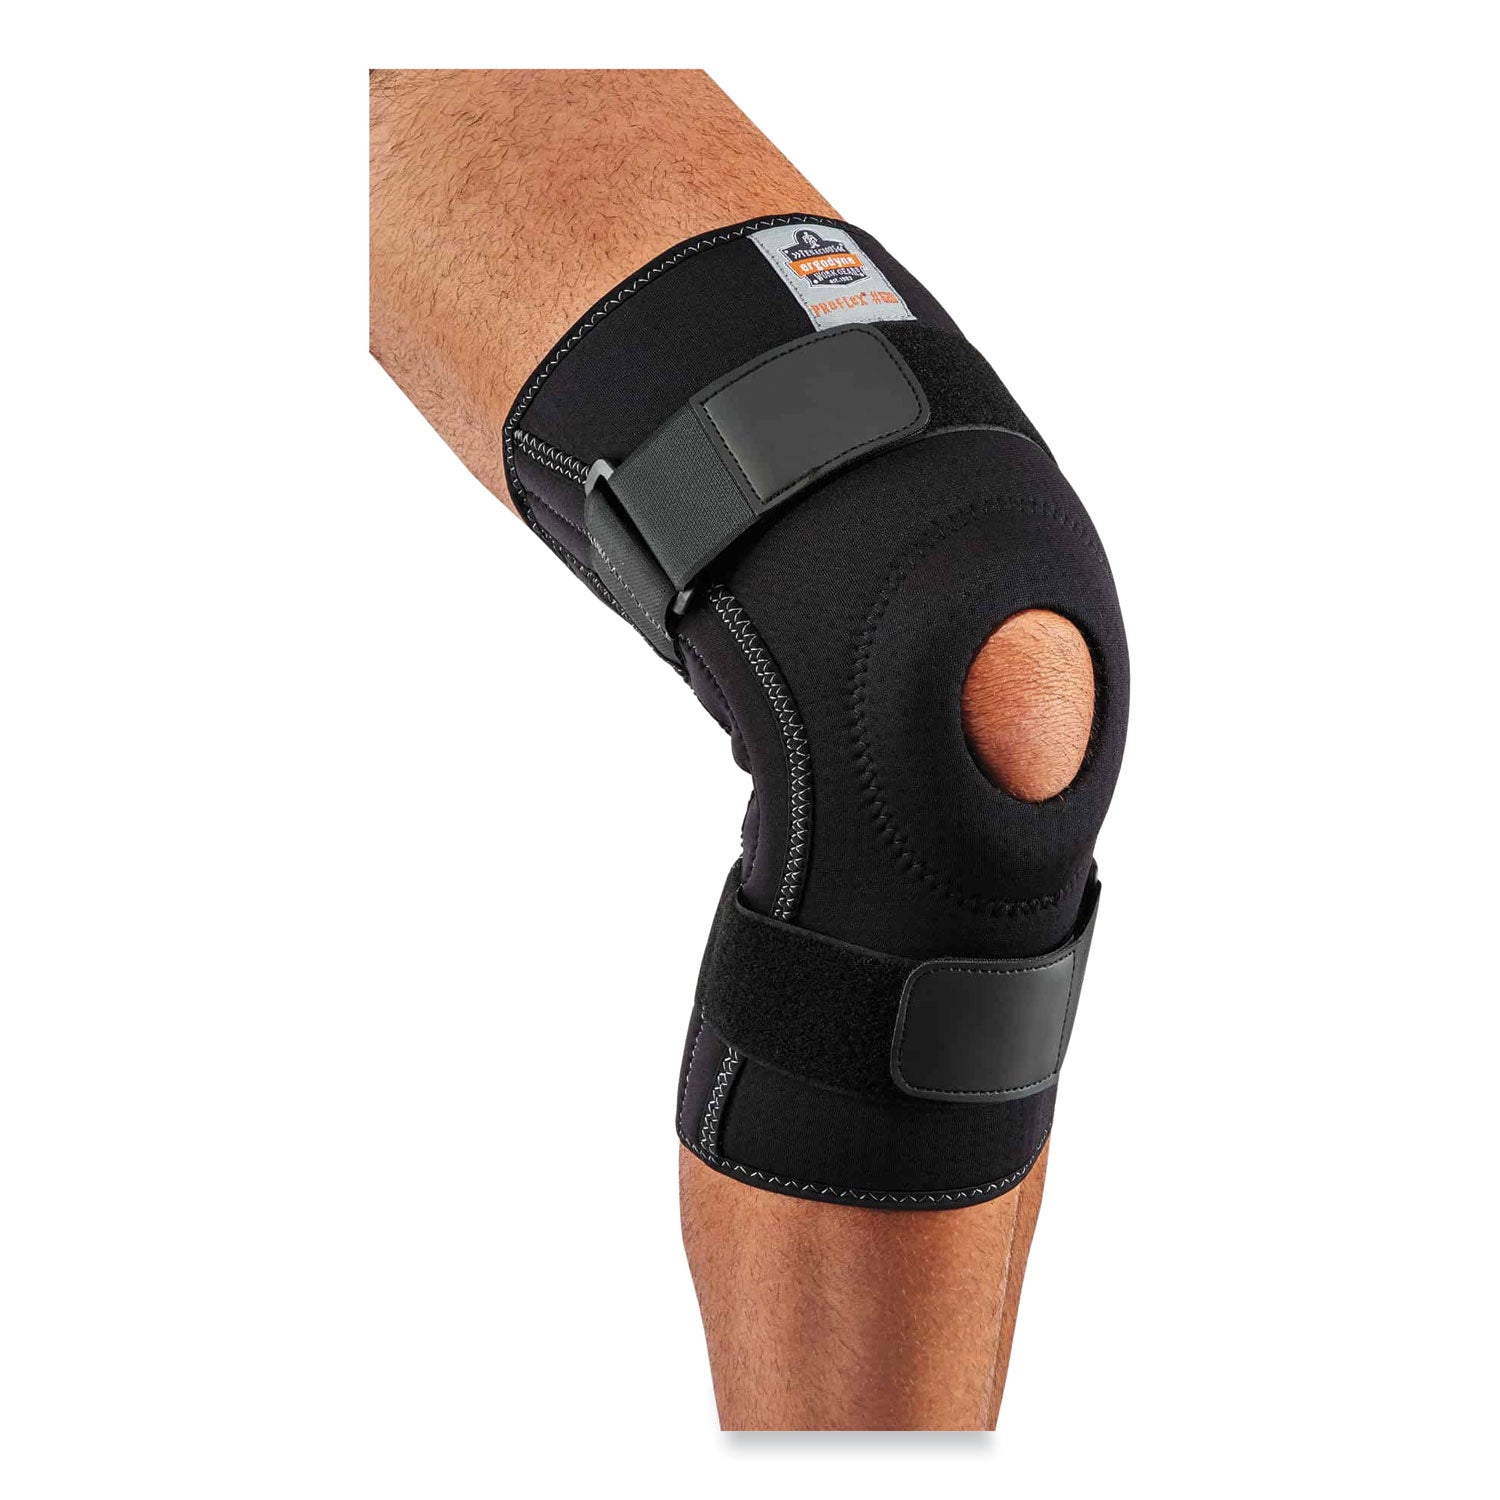 proflex-620-open-patella-spiral-stays-knee-sleeve-x-large-black-ships-in-1-3-business-days_ego16545 - 2